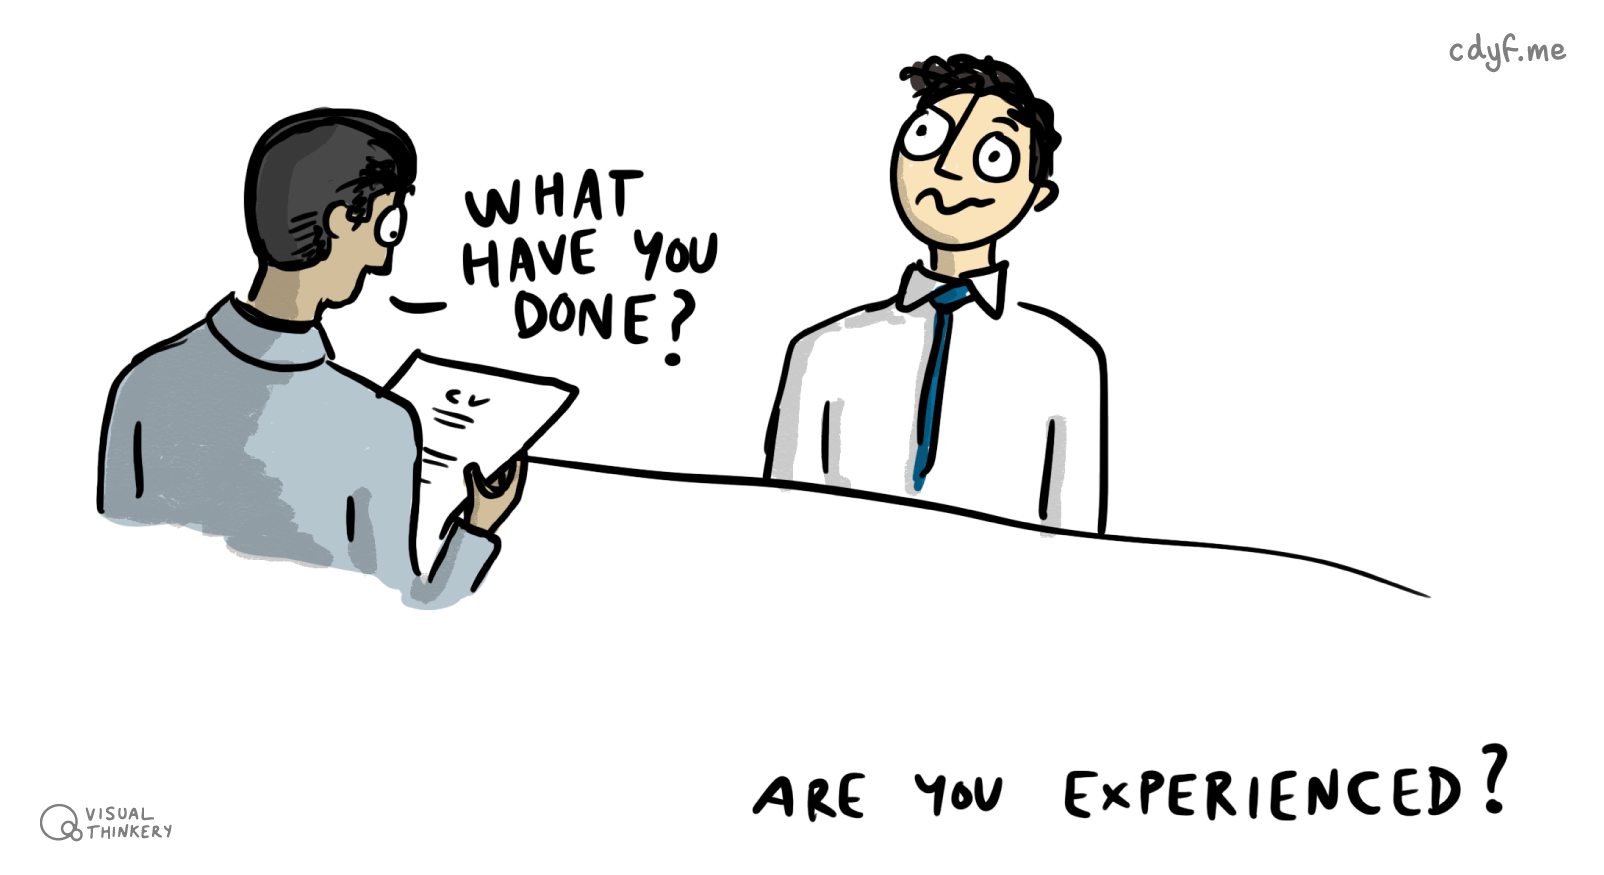 Are you experienced? What have you done outside of your formal academic education? Experience sketch by Visual Thinkery is licensed under CC-BY-ND